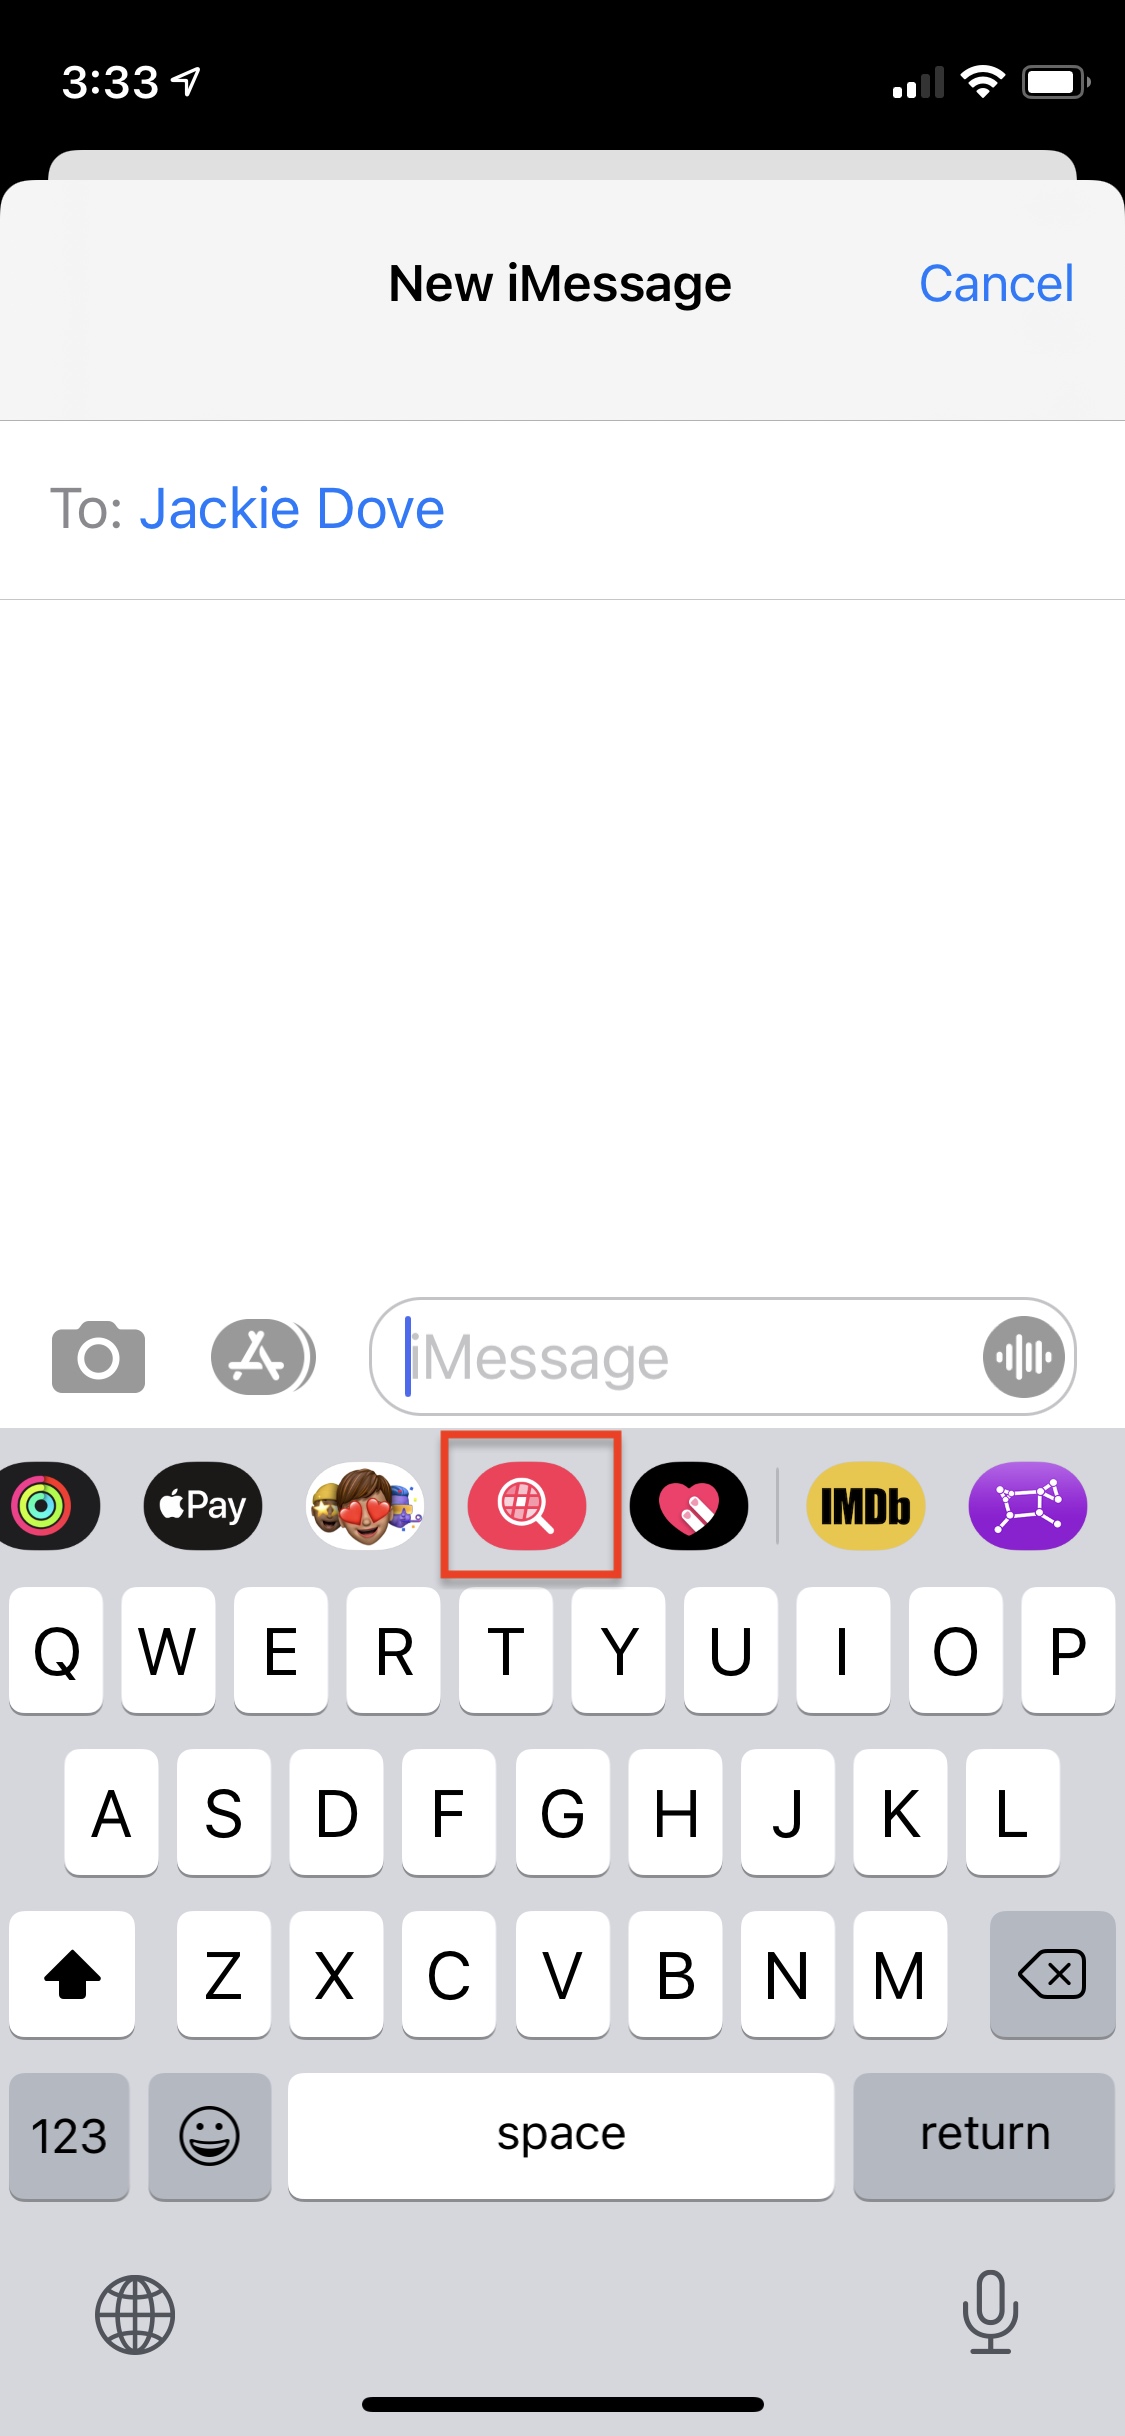 How to Make a GIF on Your iPhone in 2 Ways